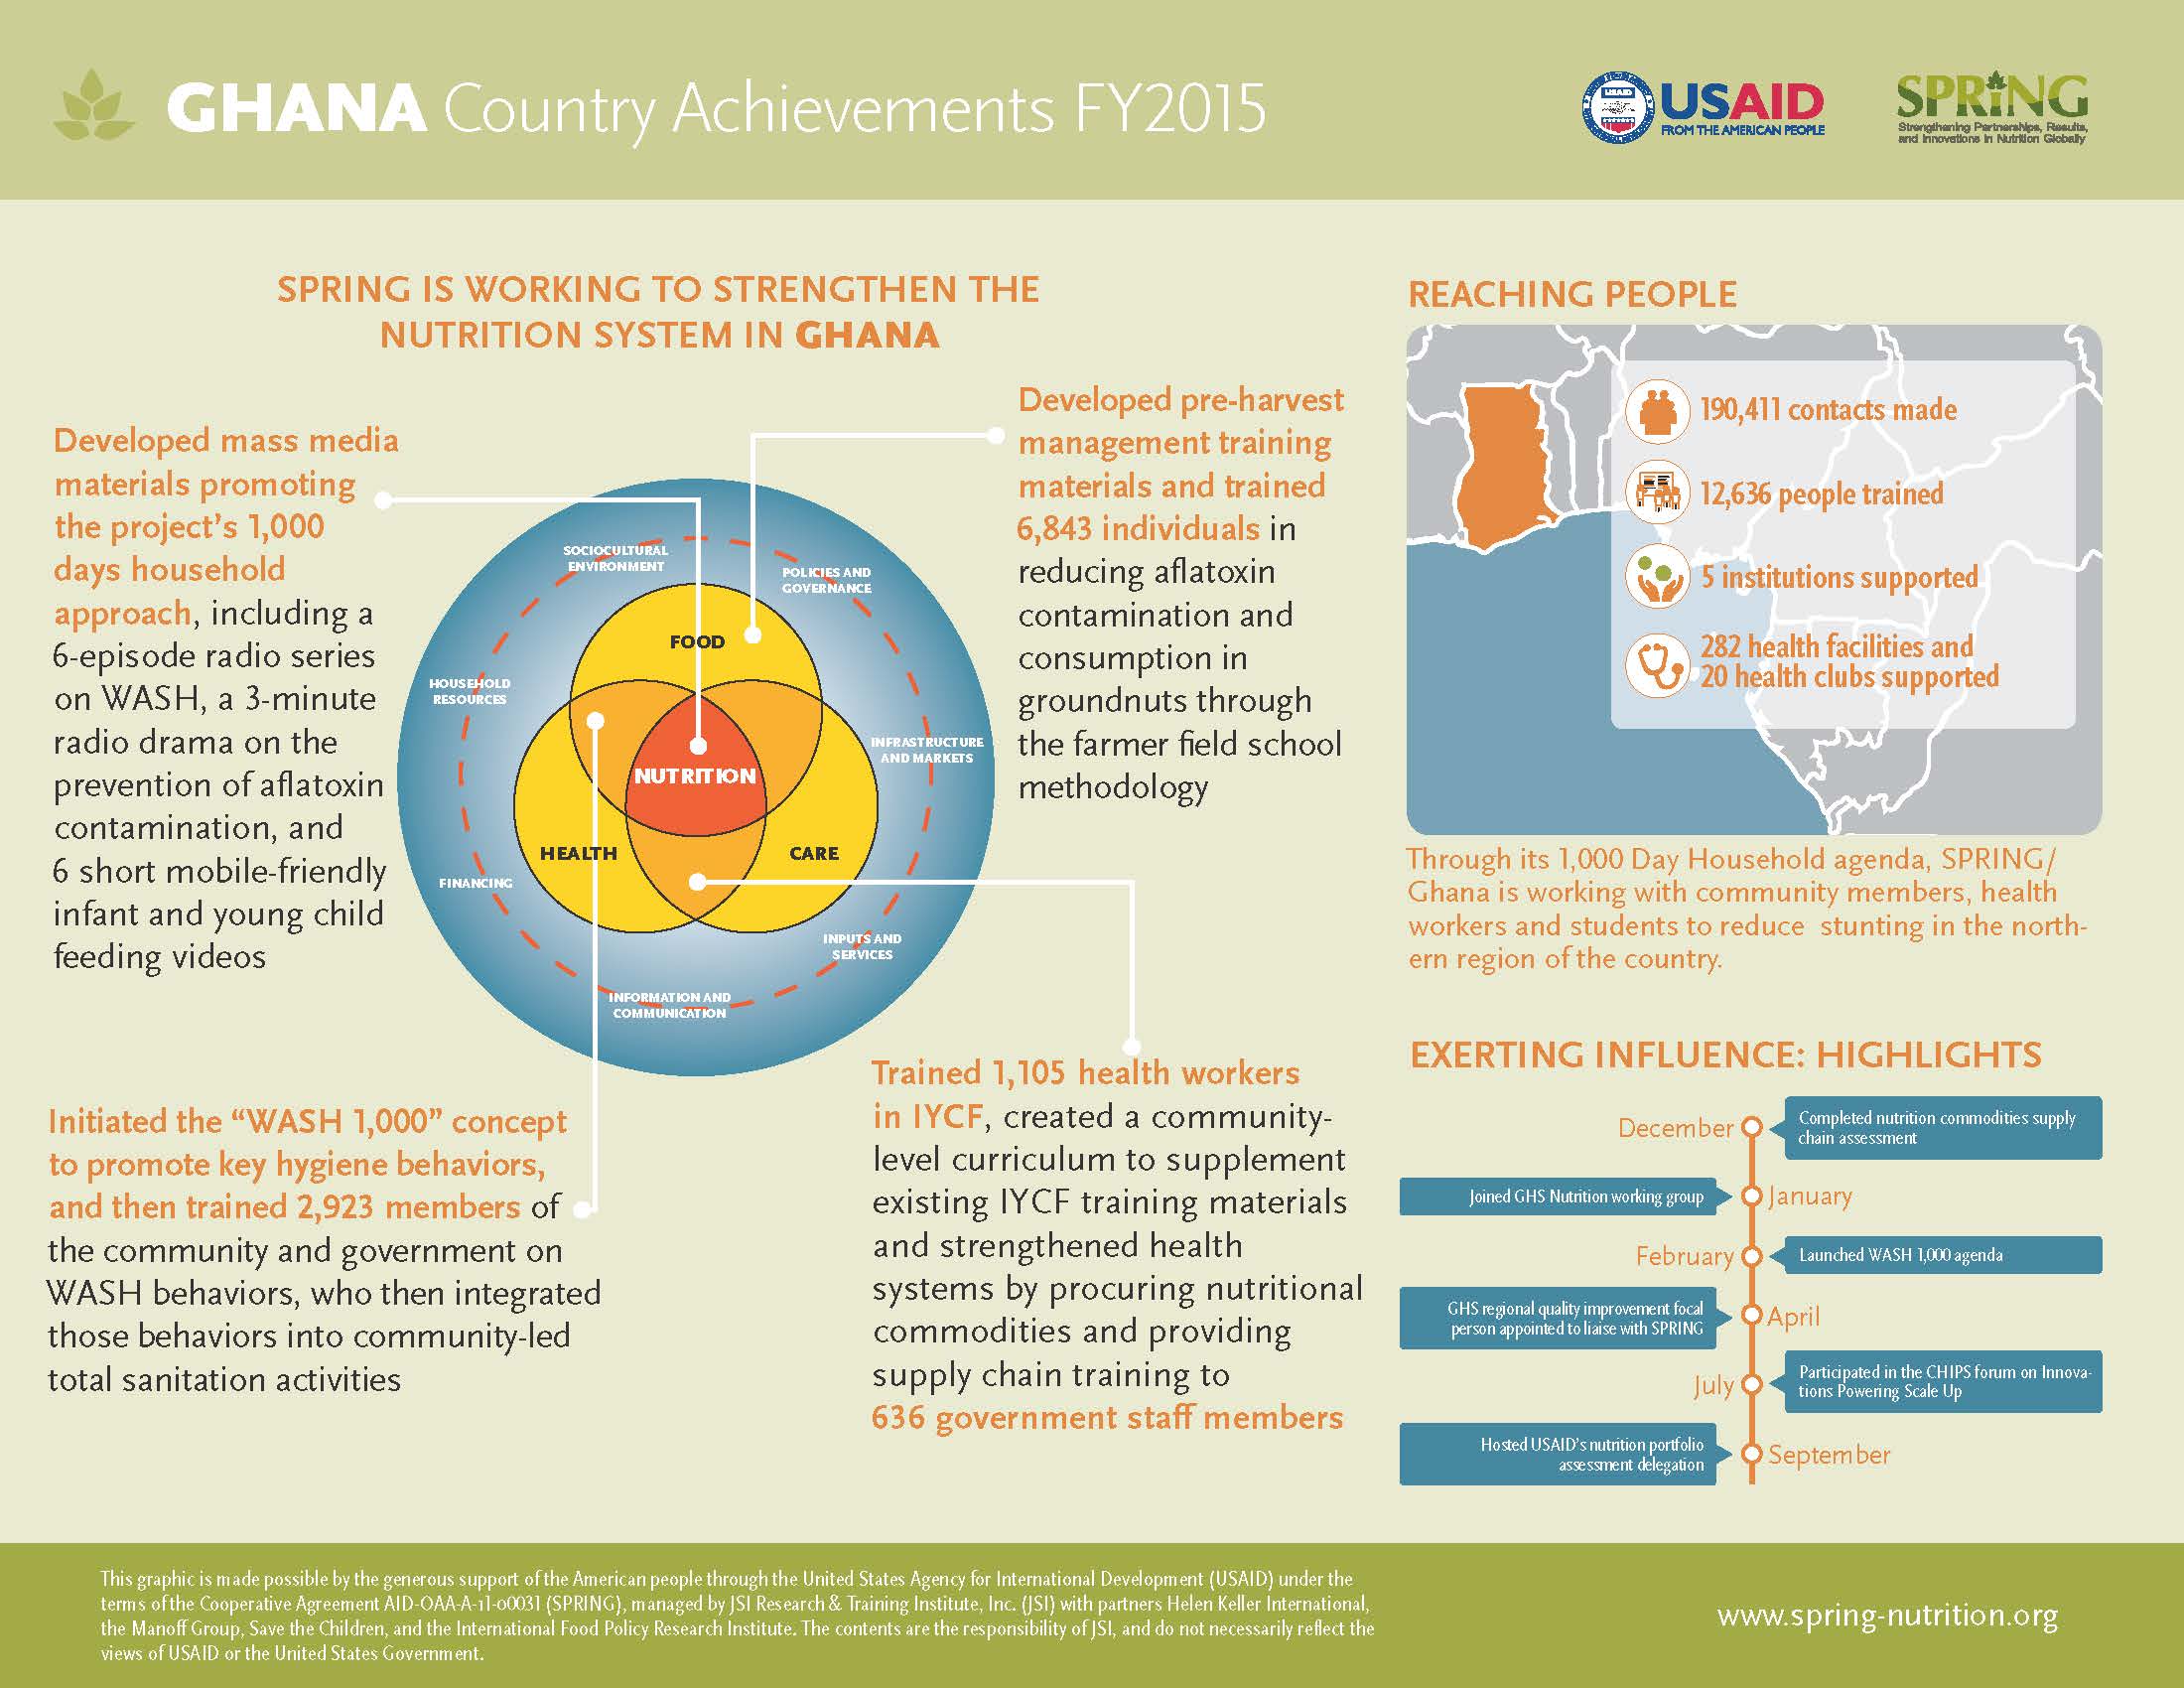 SPRING 2015 Overview - Ghana